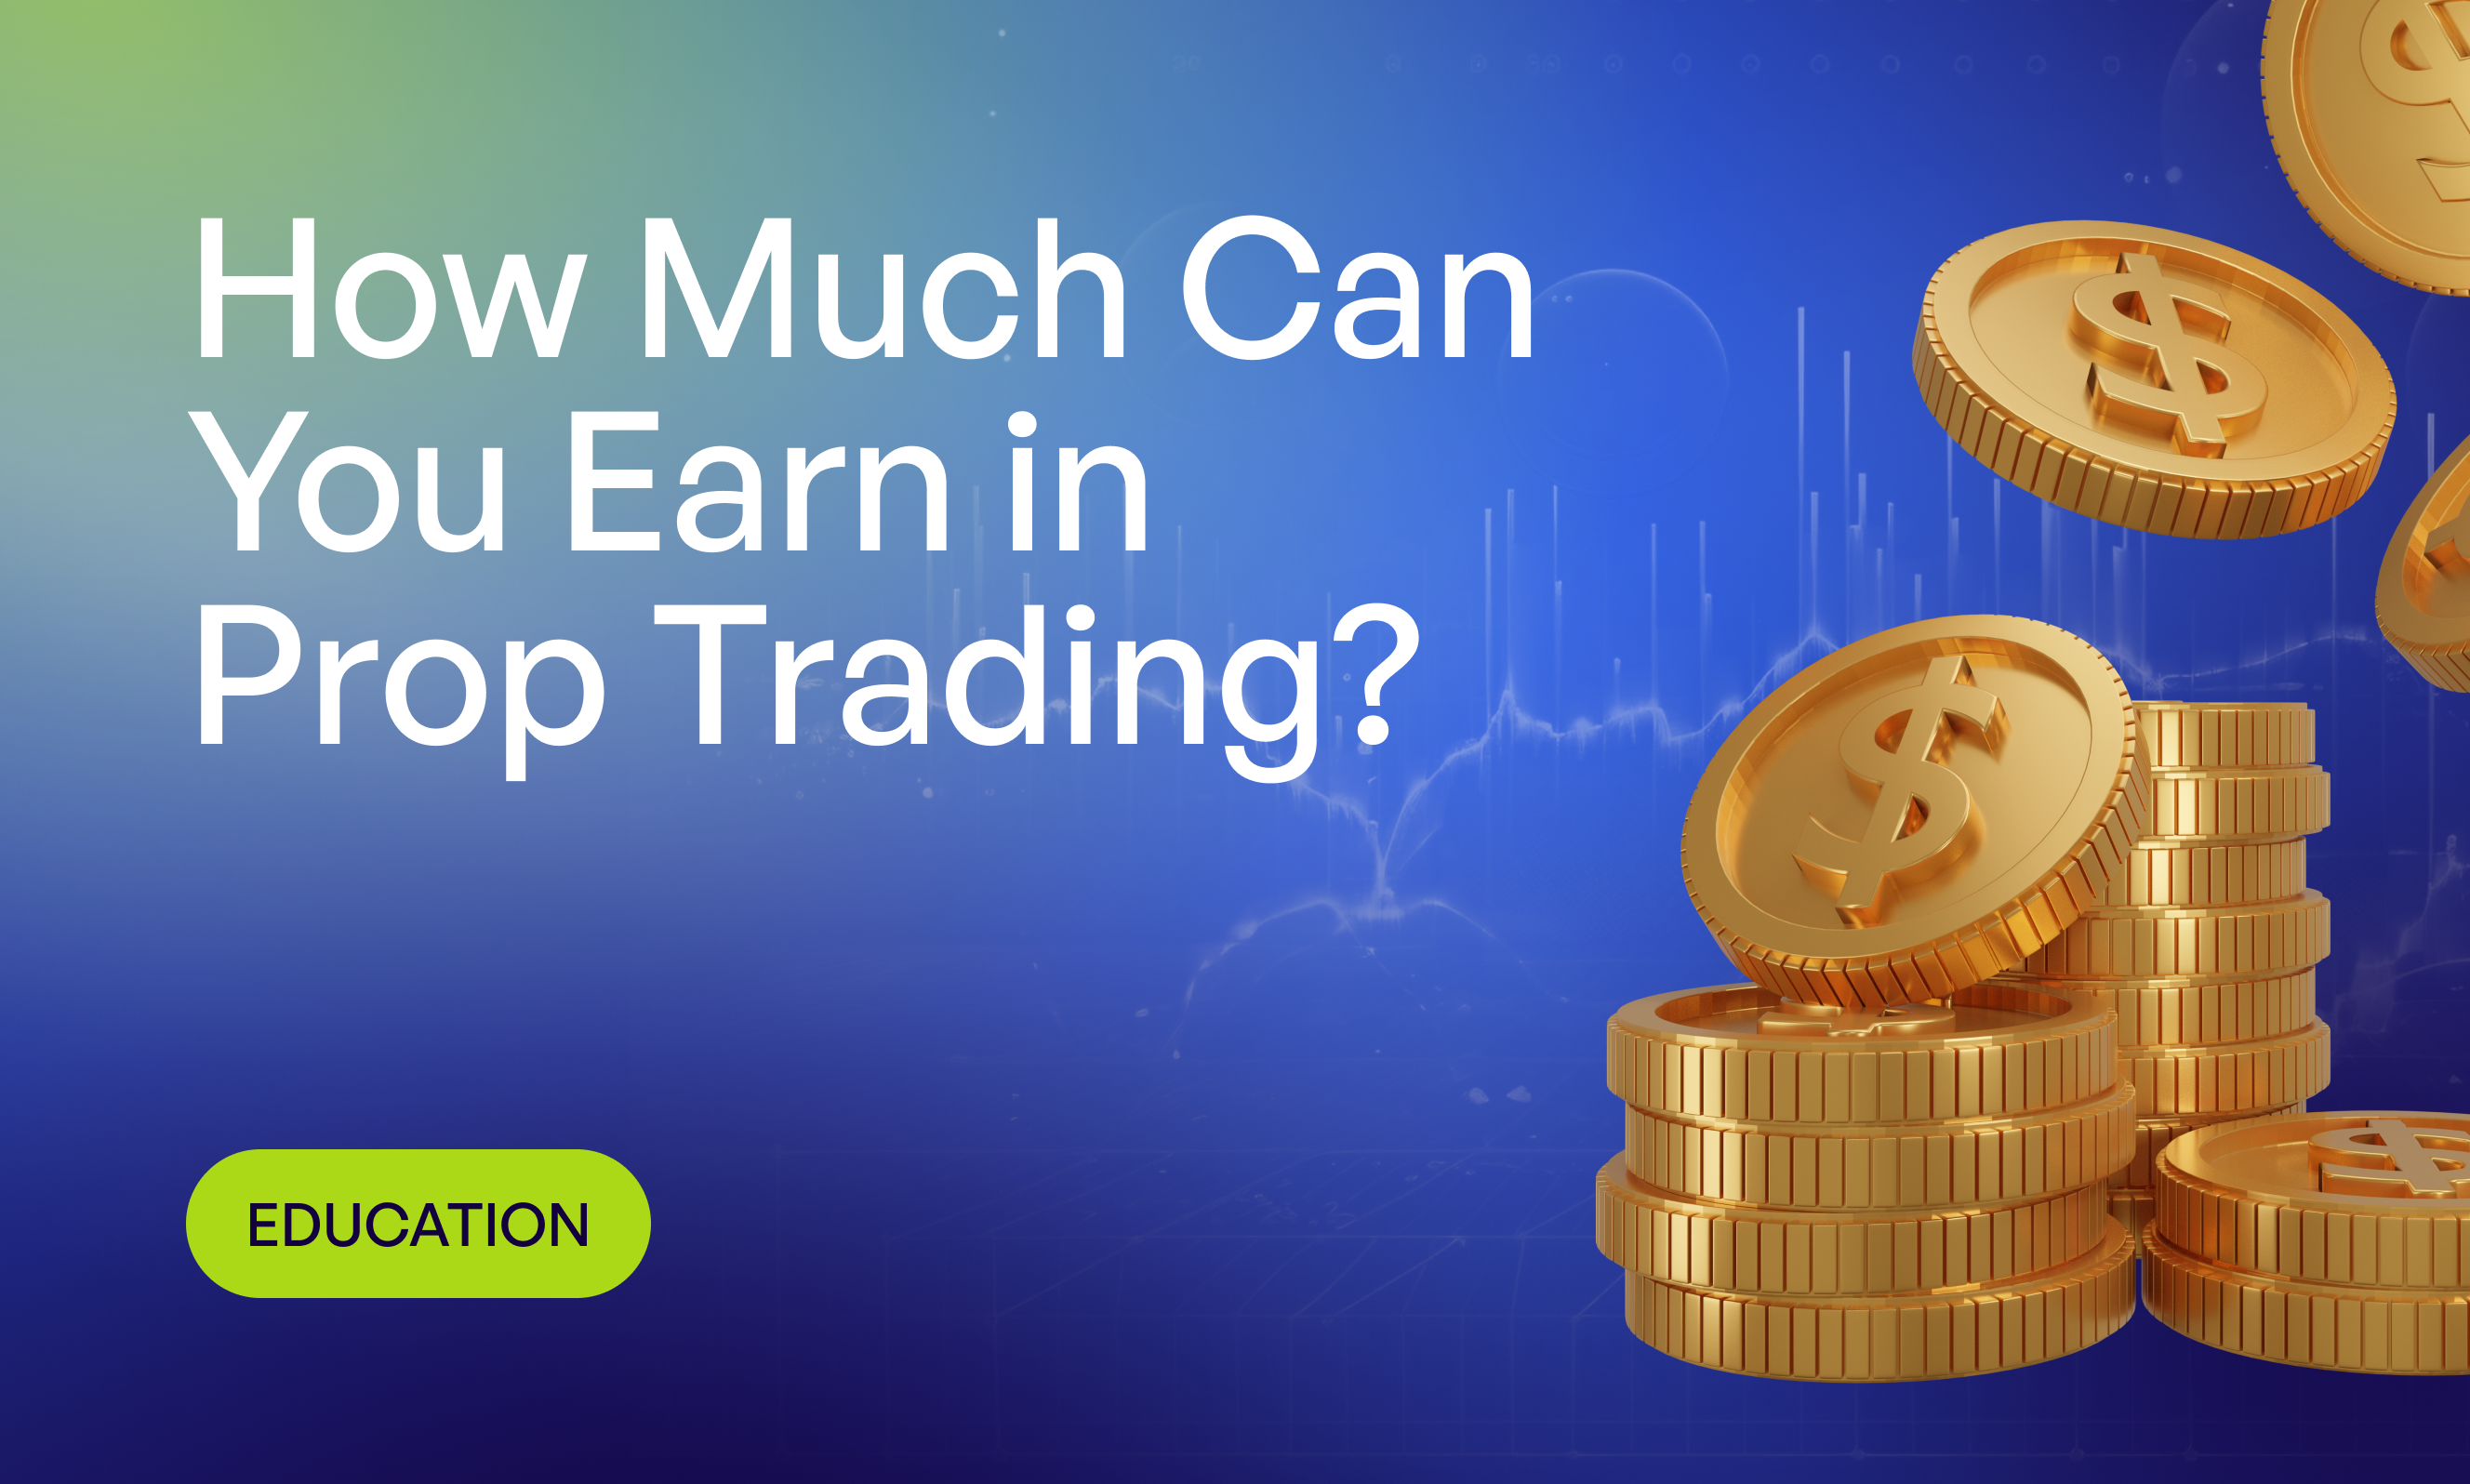 Earning on Prop Trading – How Much Can You Earn on Prop Trading?